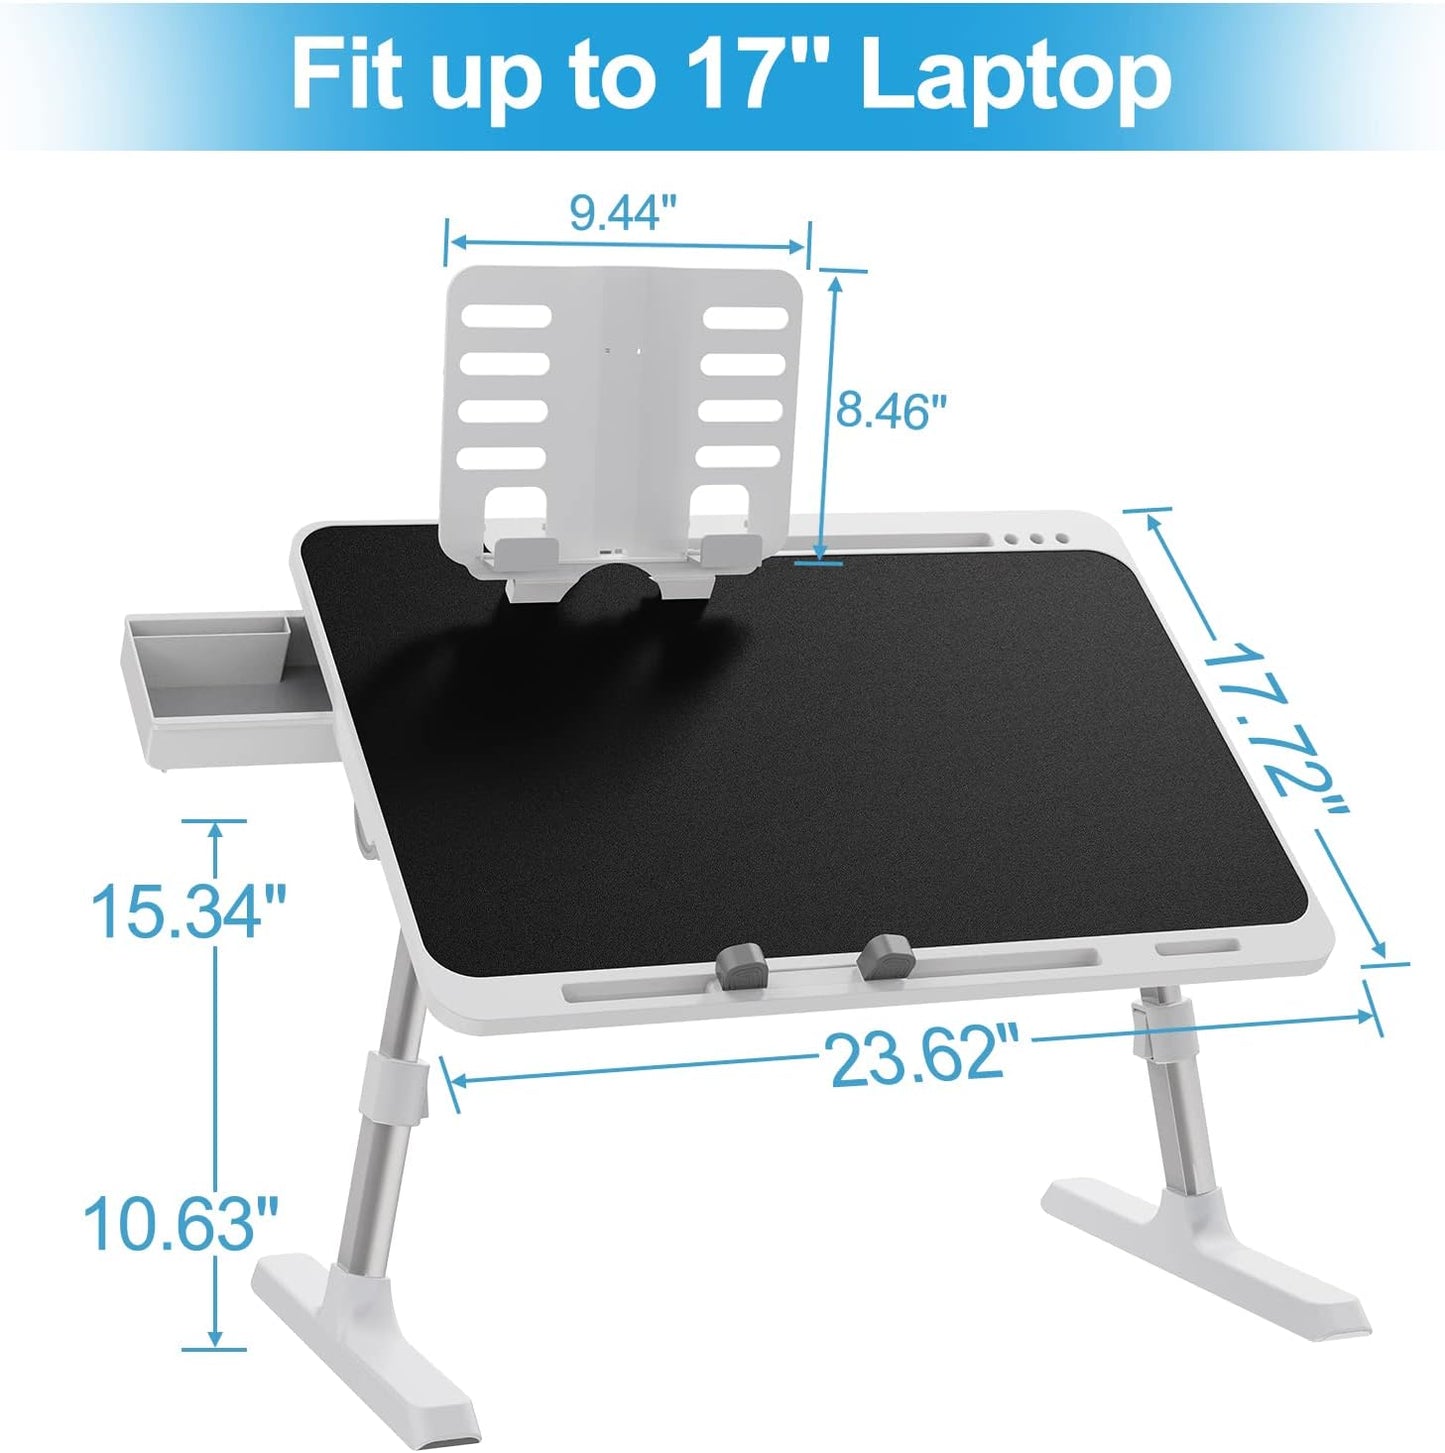 WOKA Laptop Desk for Bed, Extra Large Adjustable Lap Desk, Foldable Laptop Bed Tray Table with Storage Drawer, Portable Lap Desk with Stopper, Book Stand for Drawing, Writing, Working, Black